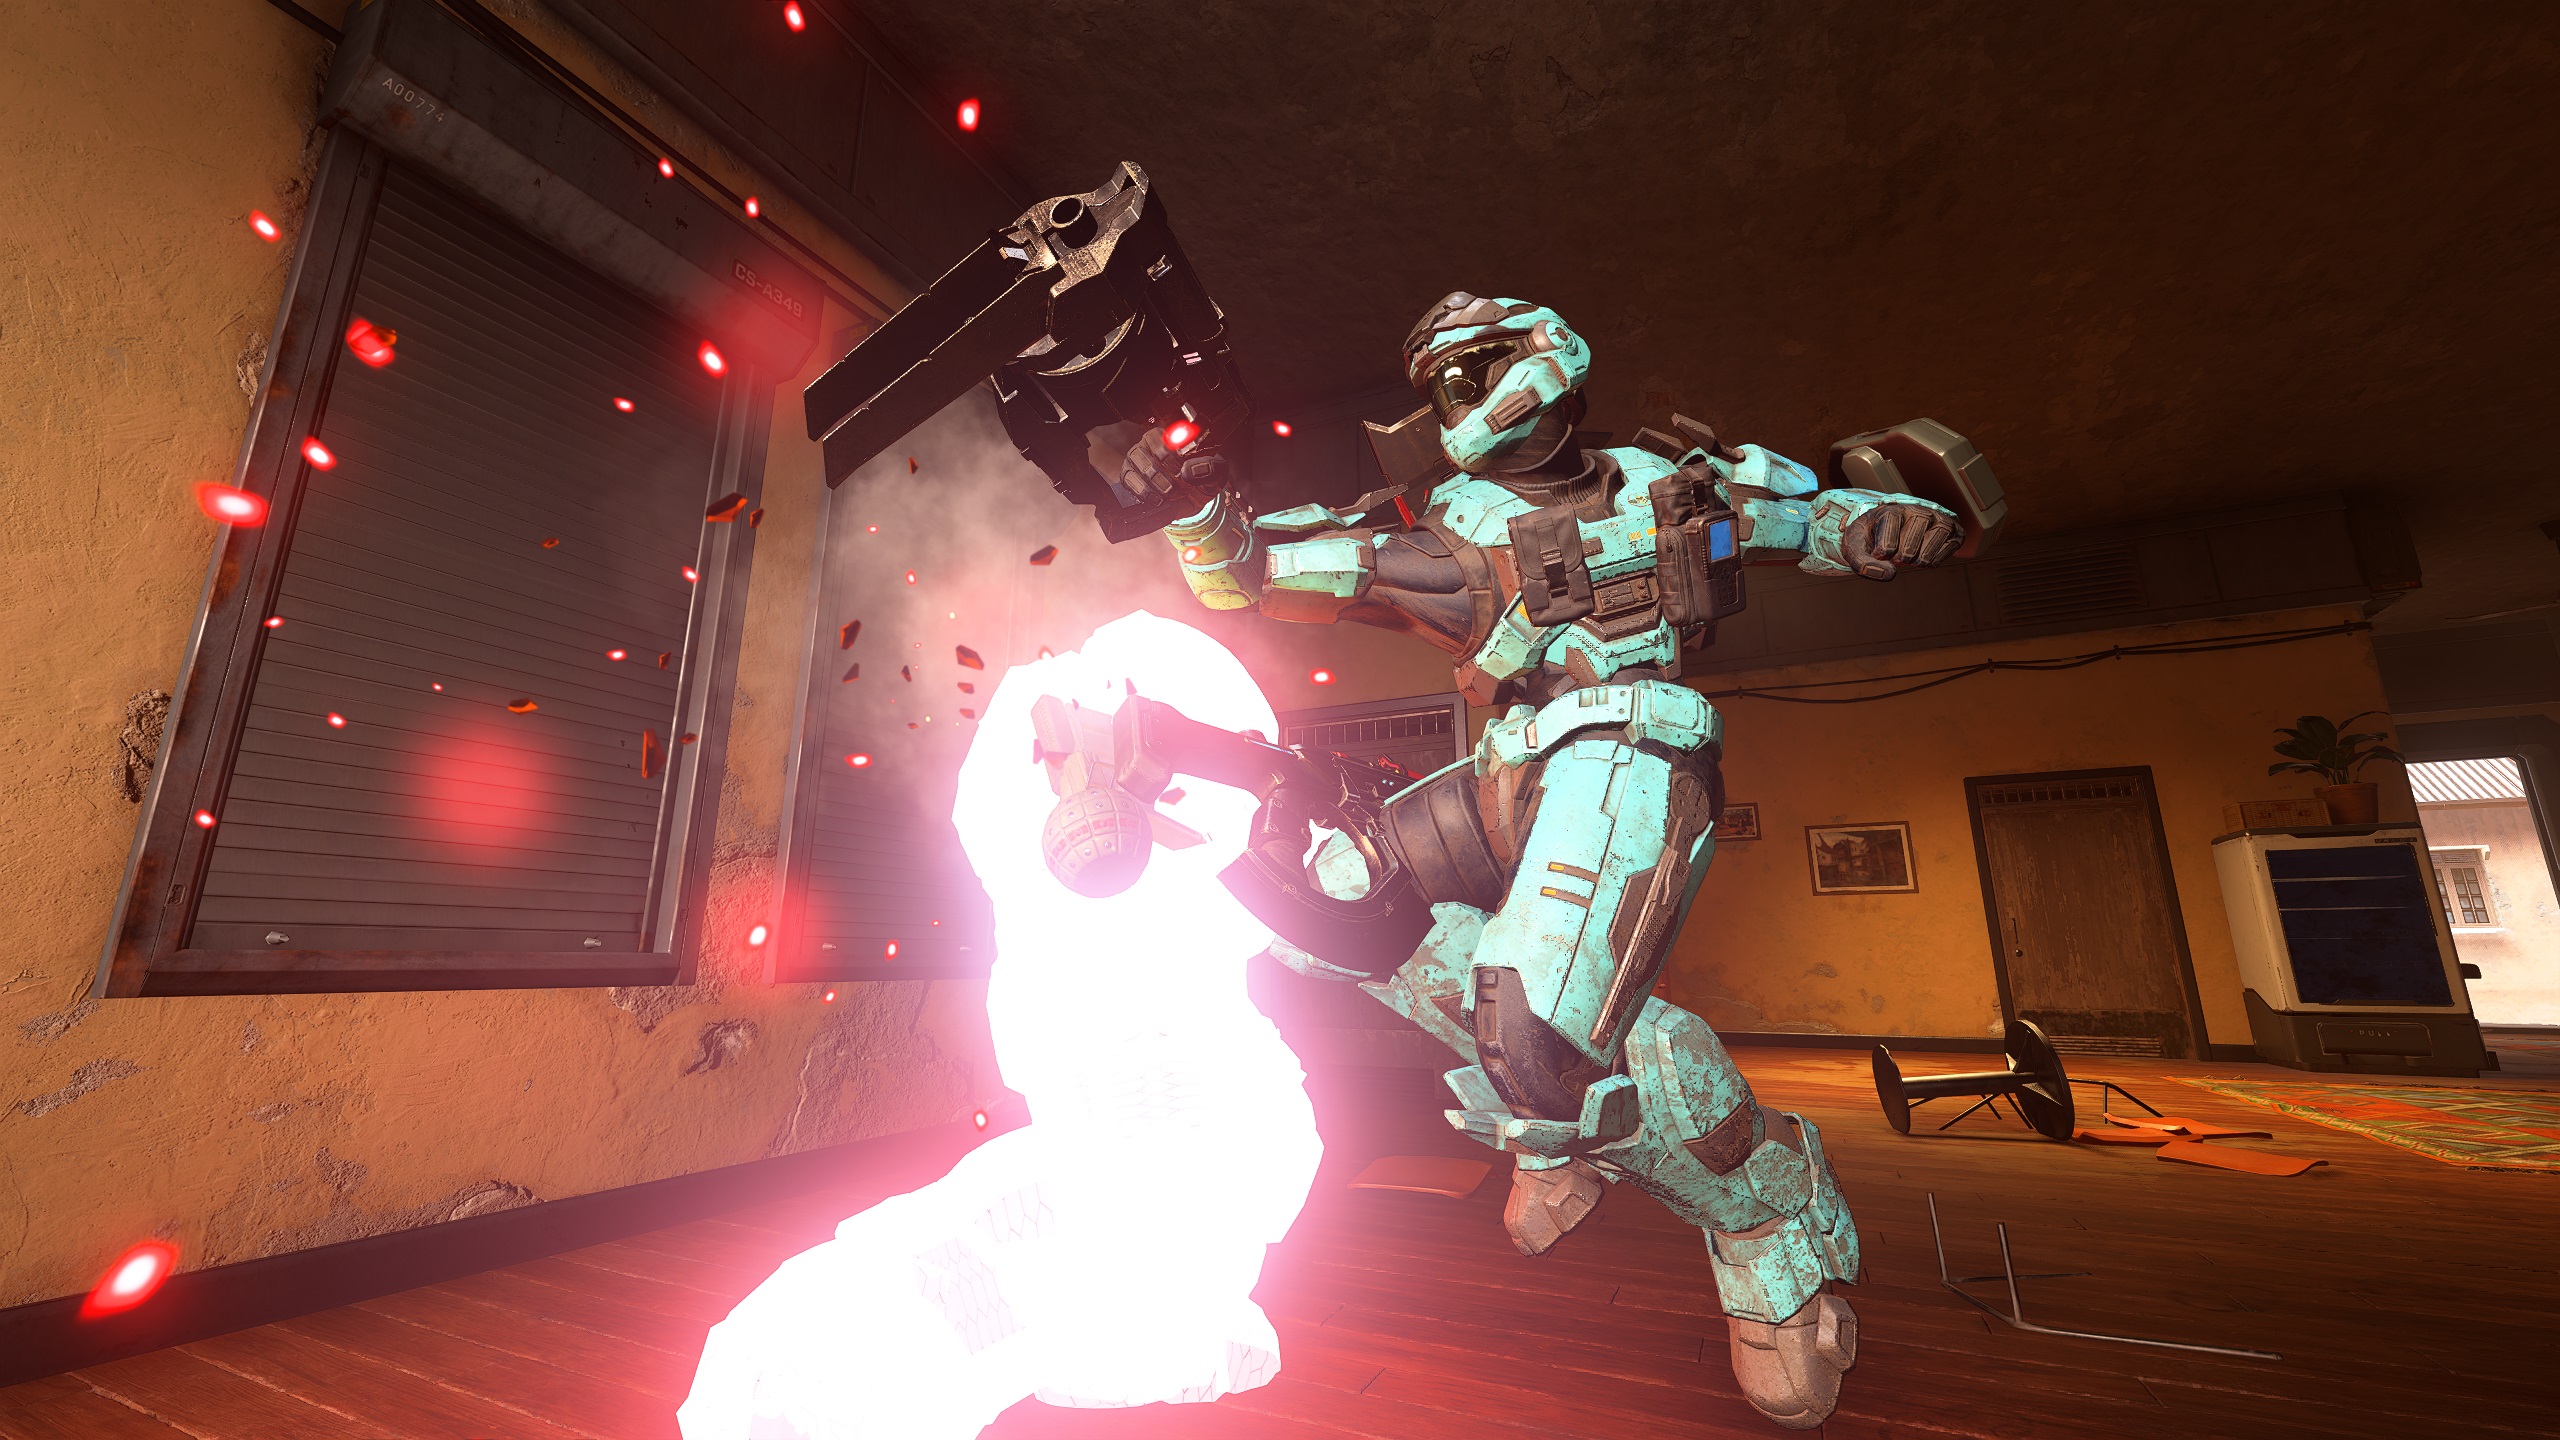 A cyan halo soldier knocks down a red glowing opponent